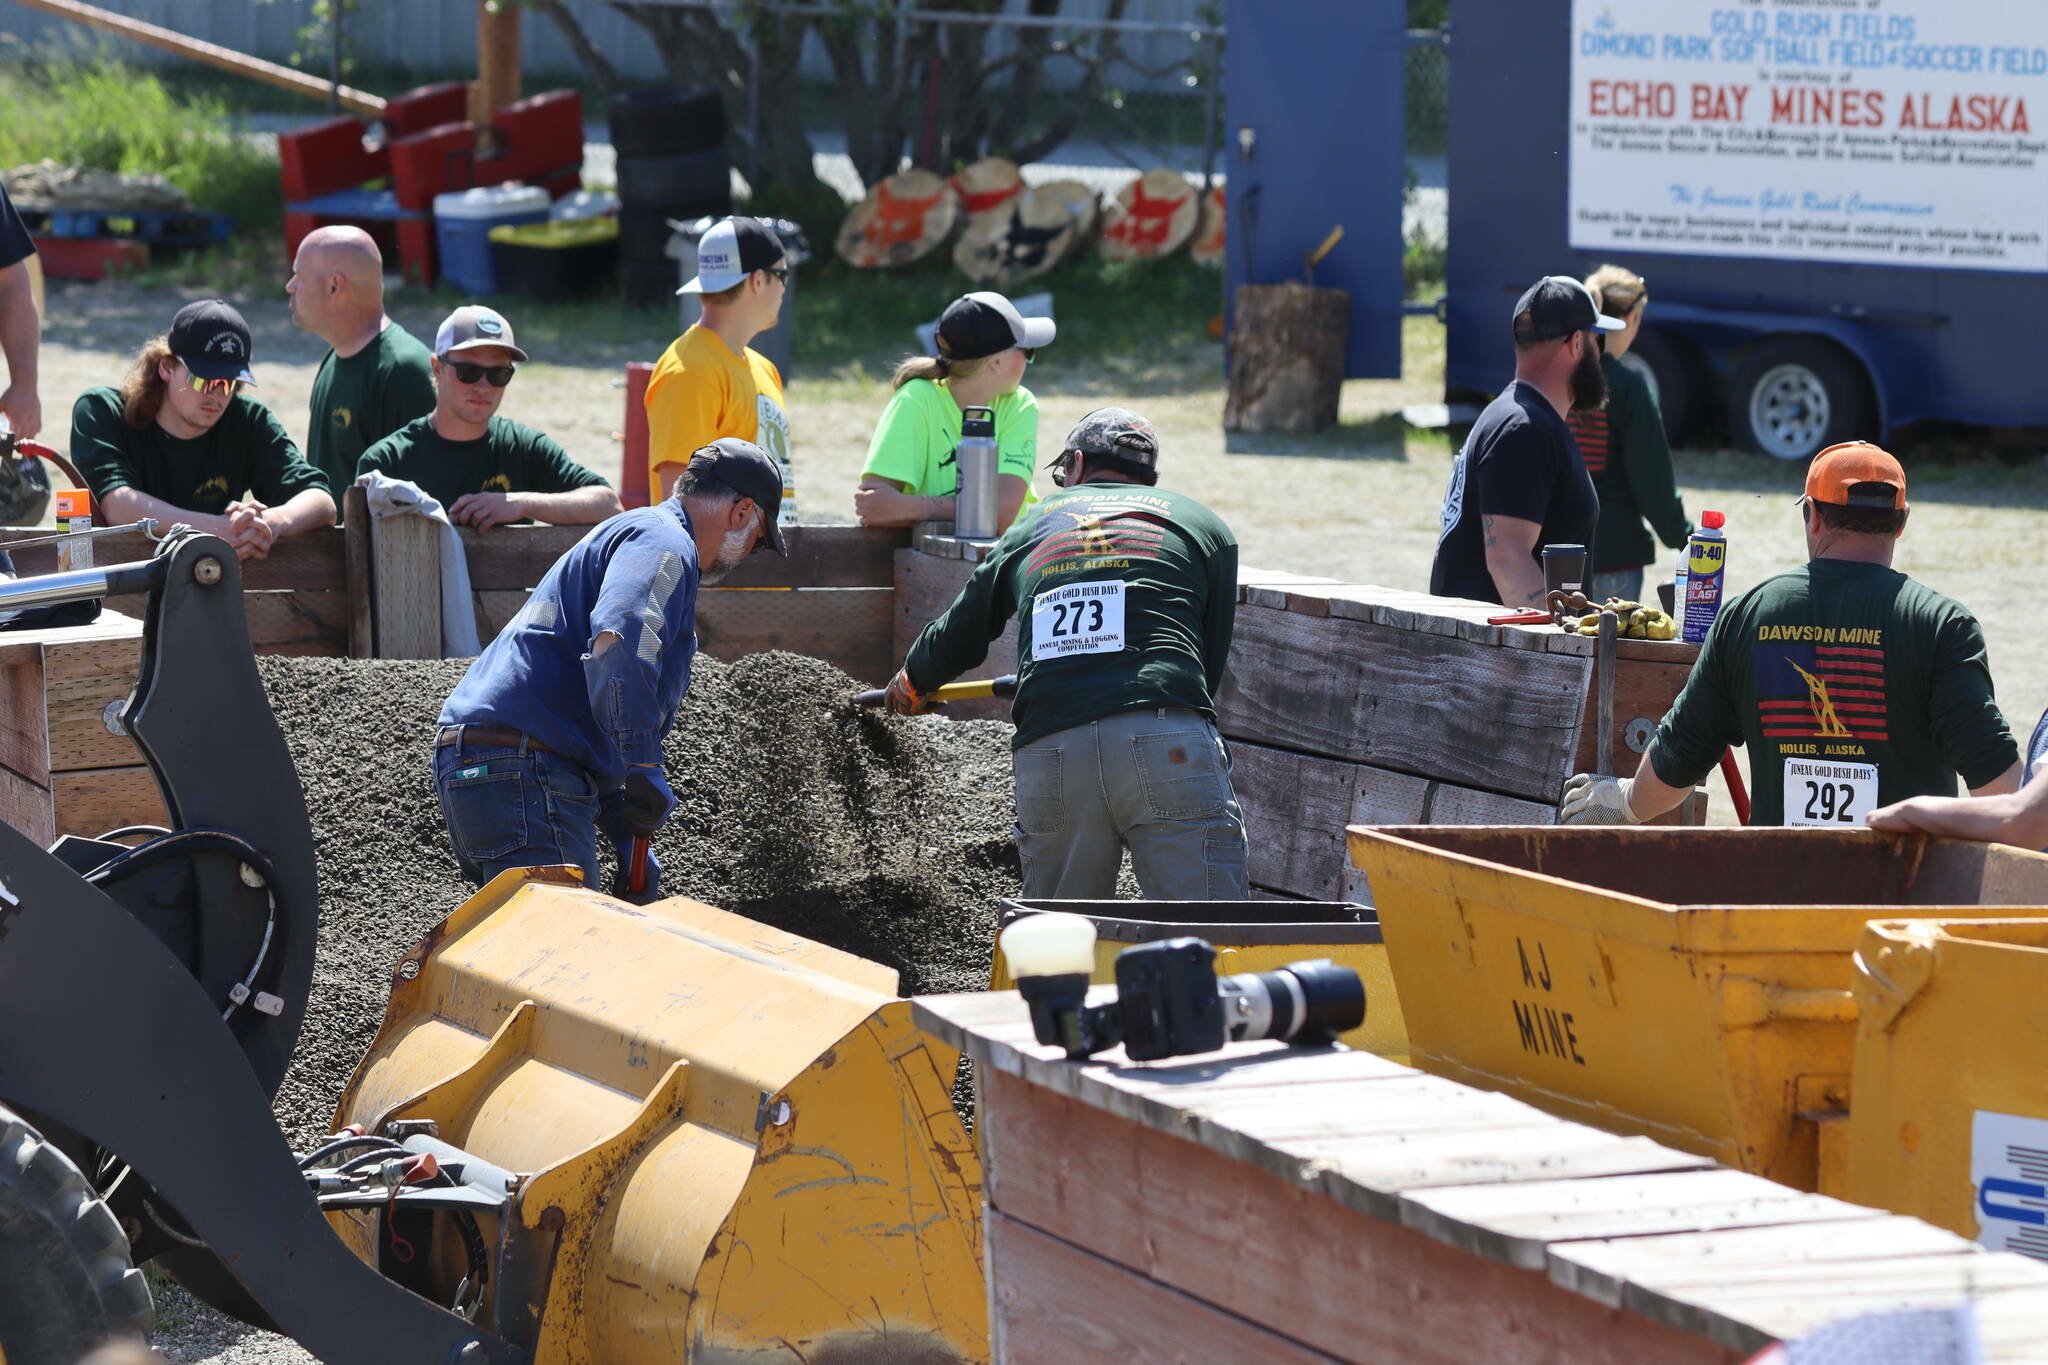 Volunteers reset a gravel pile during the men’s hand mucking event of Juneau Gold Rush Days in Savikko Park on June 18, 2022. This year’s events are scheduled Saturday and Sunday. (Michael S. Lockett / Juneau Empire File)